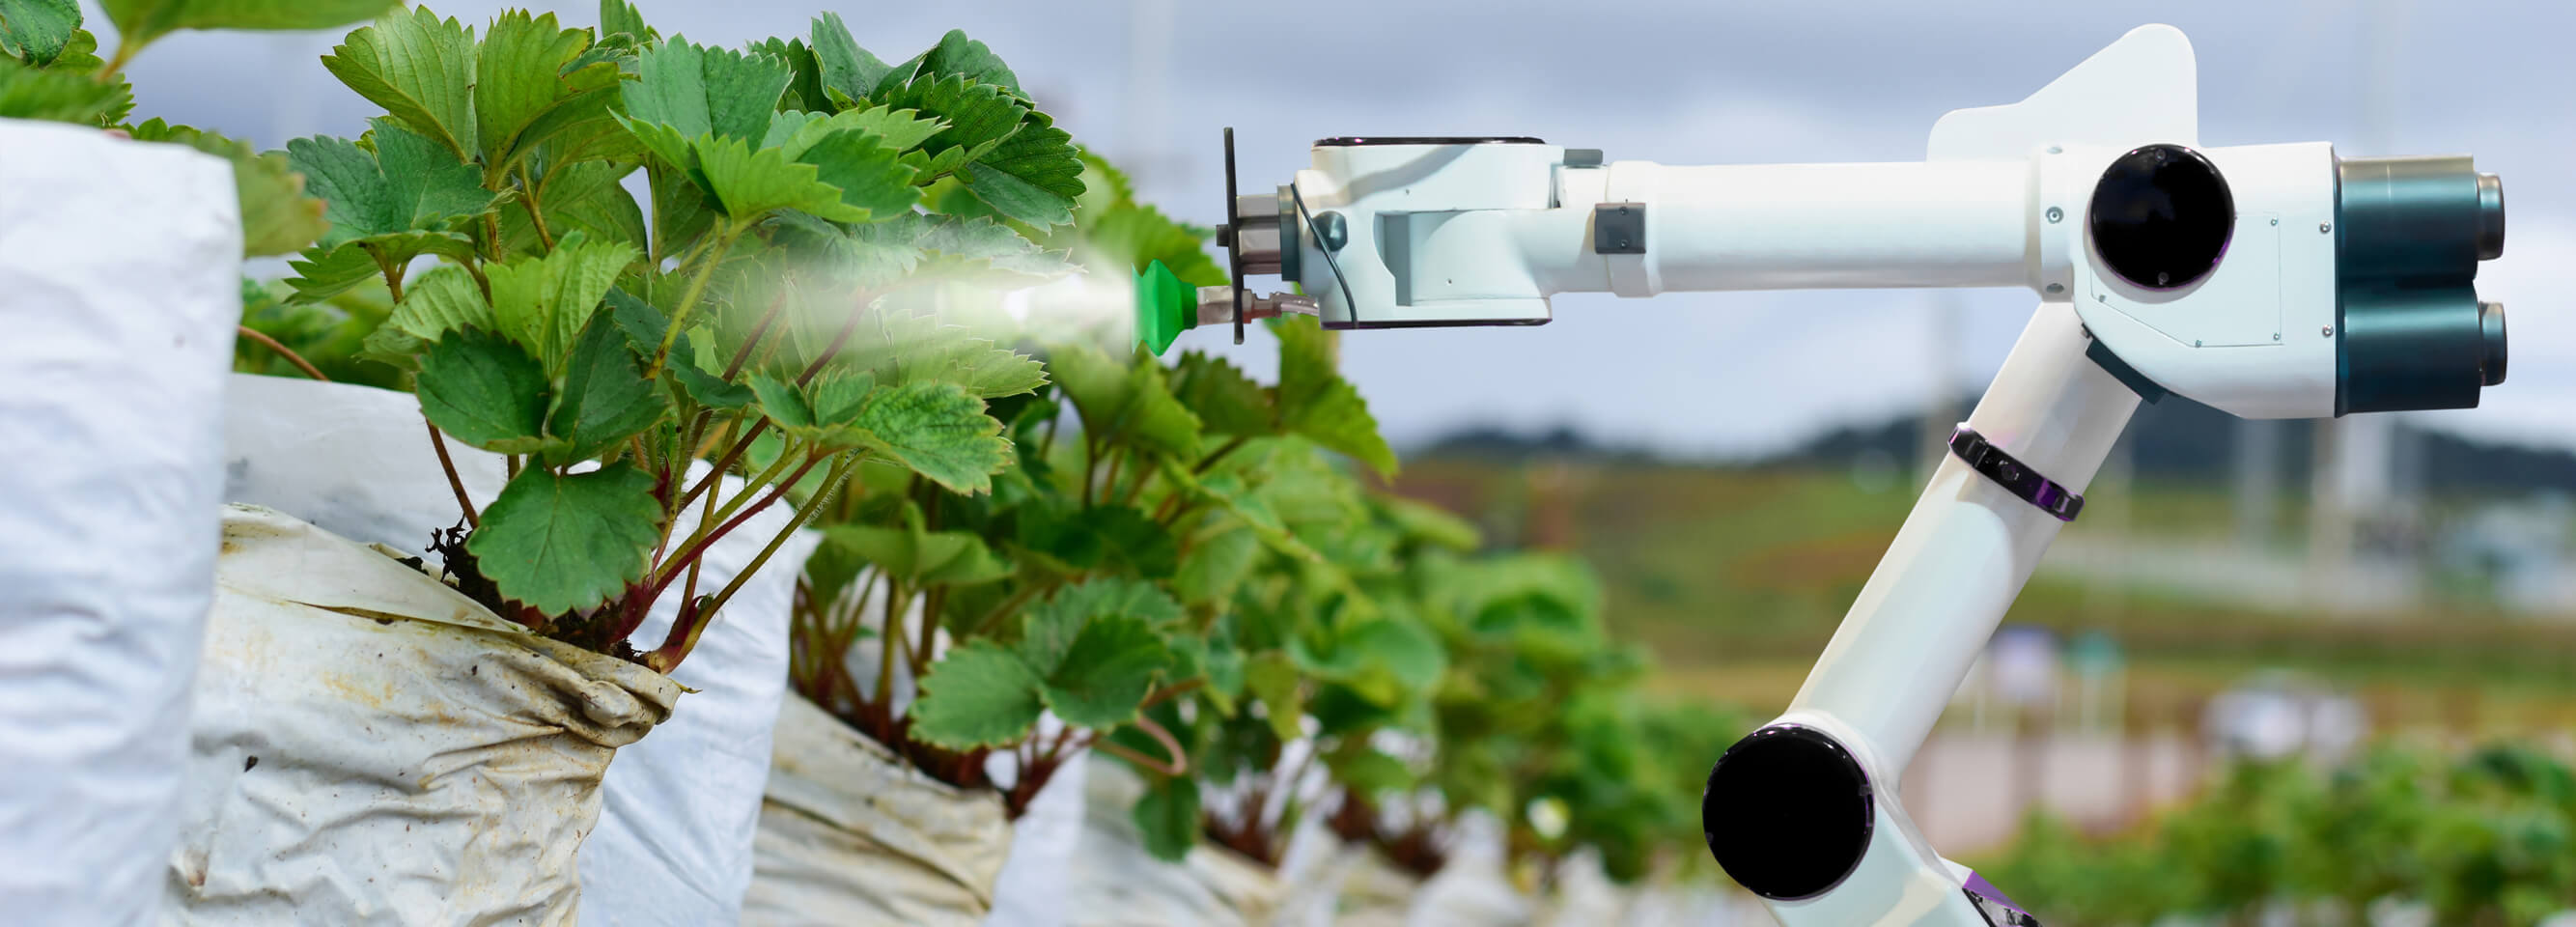 An agricultural robot for feeding the plants.